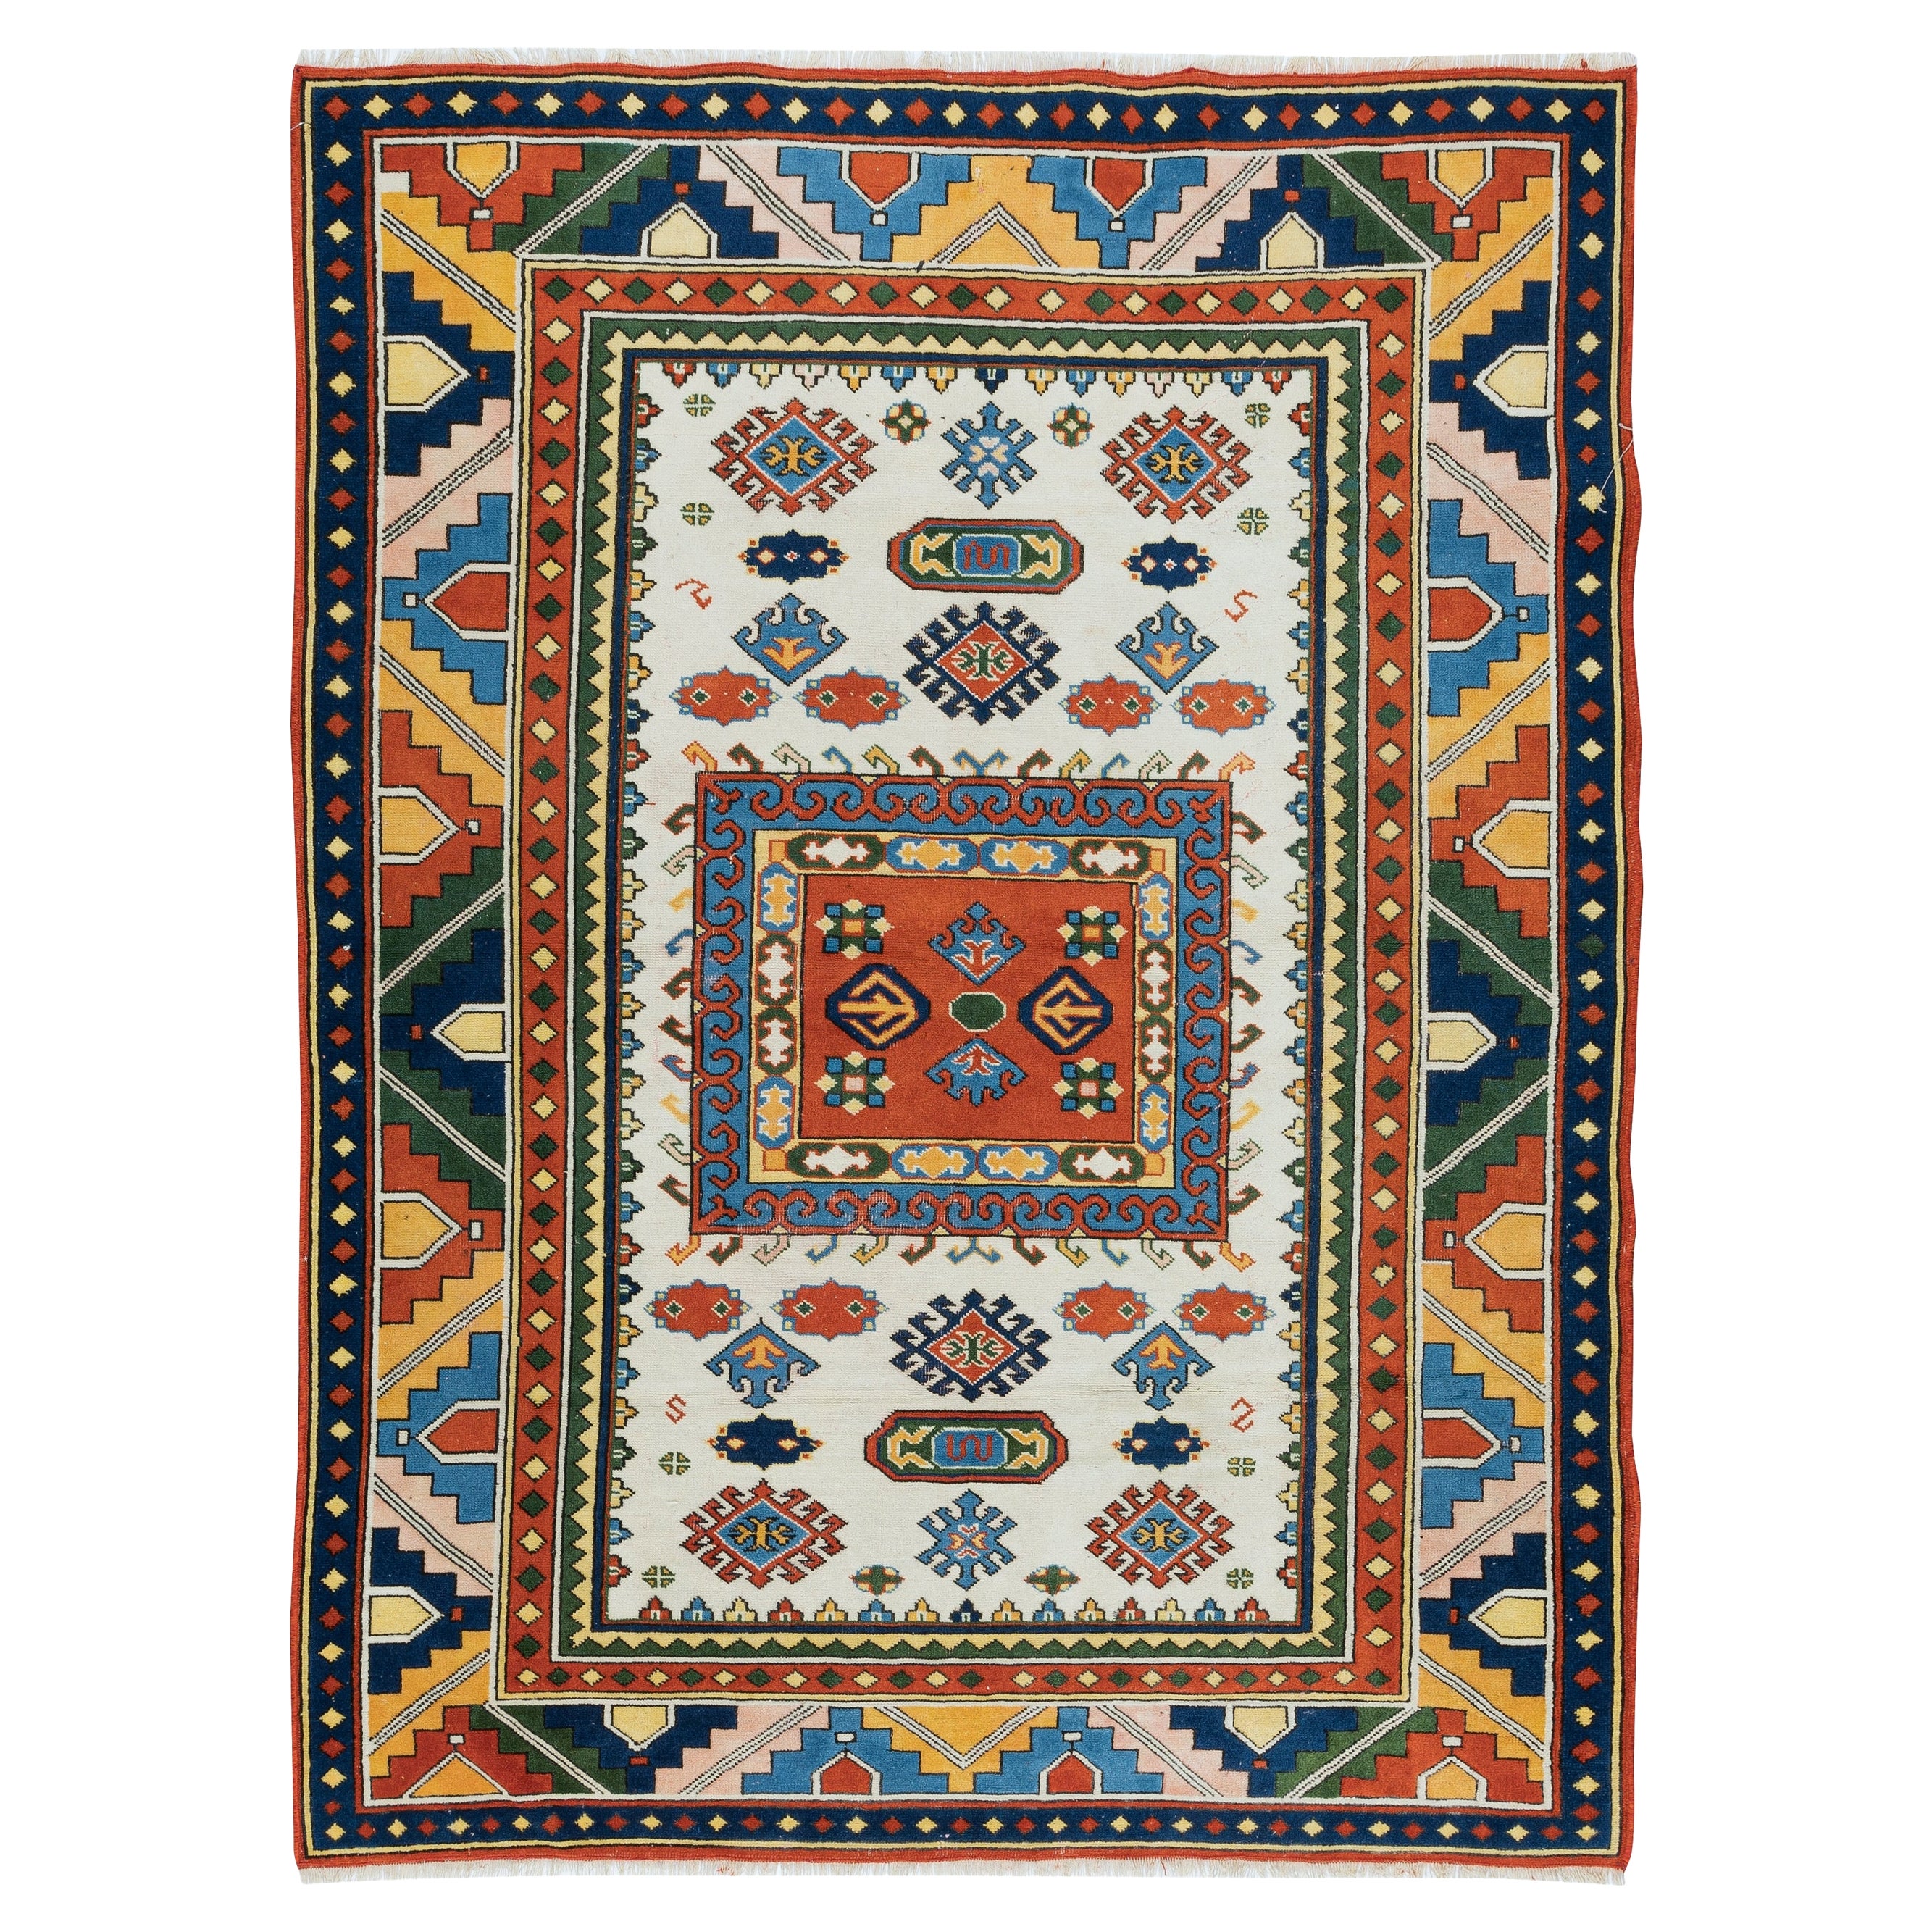 4x5.6 Ft Colorful Accent Rug, Modern Turkish Carpet, Handmade Floor Covering For Sale